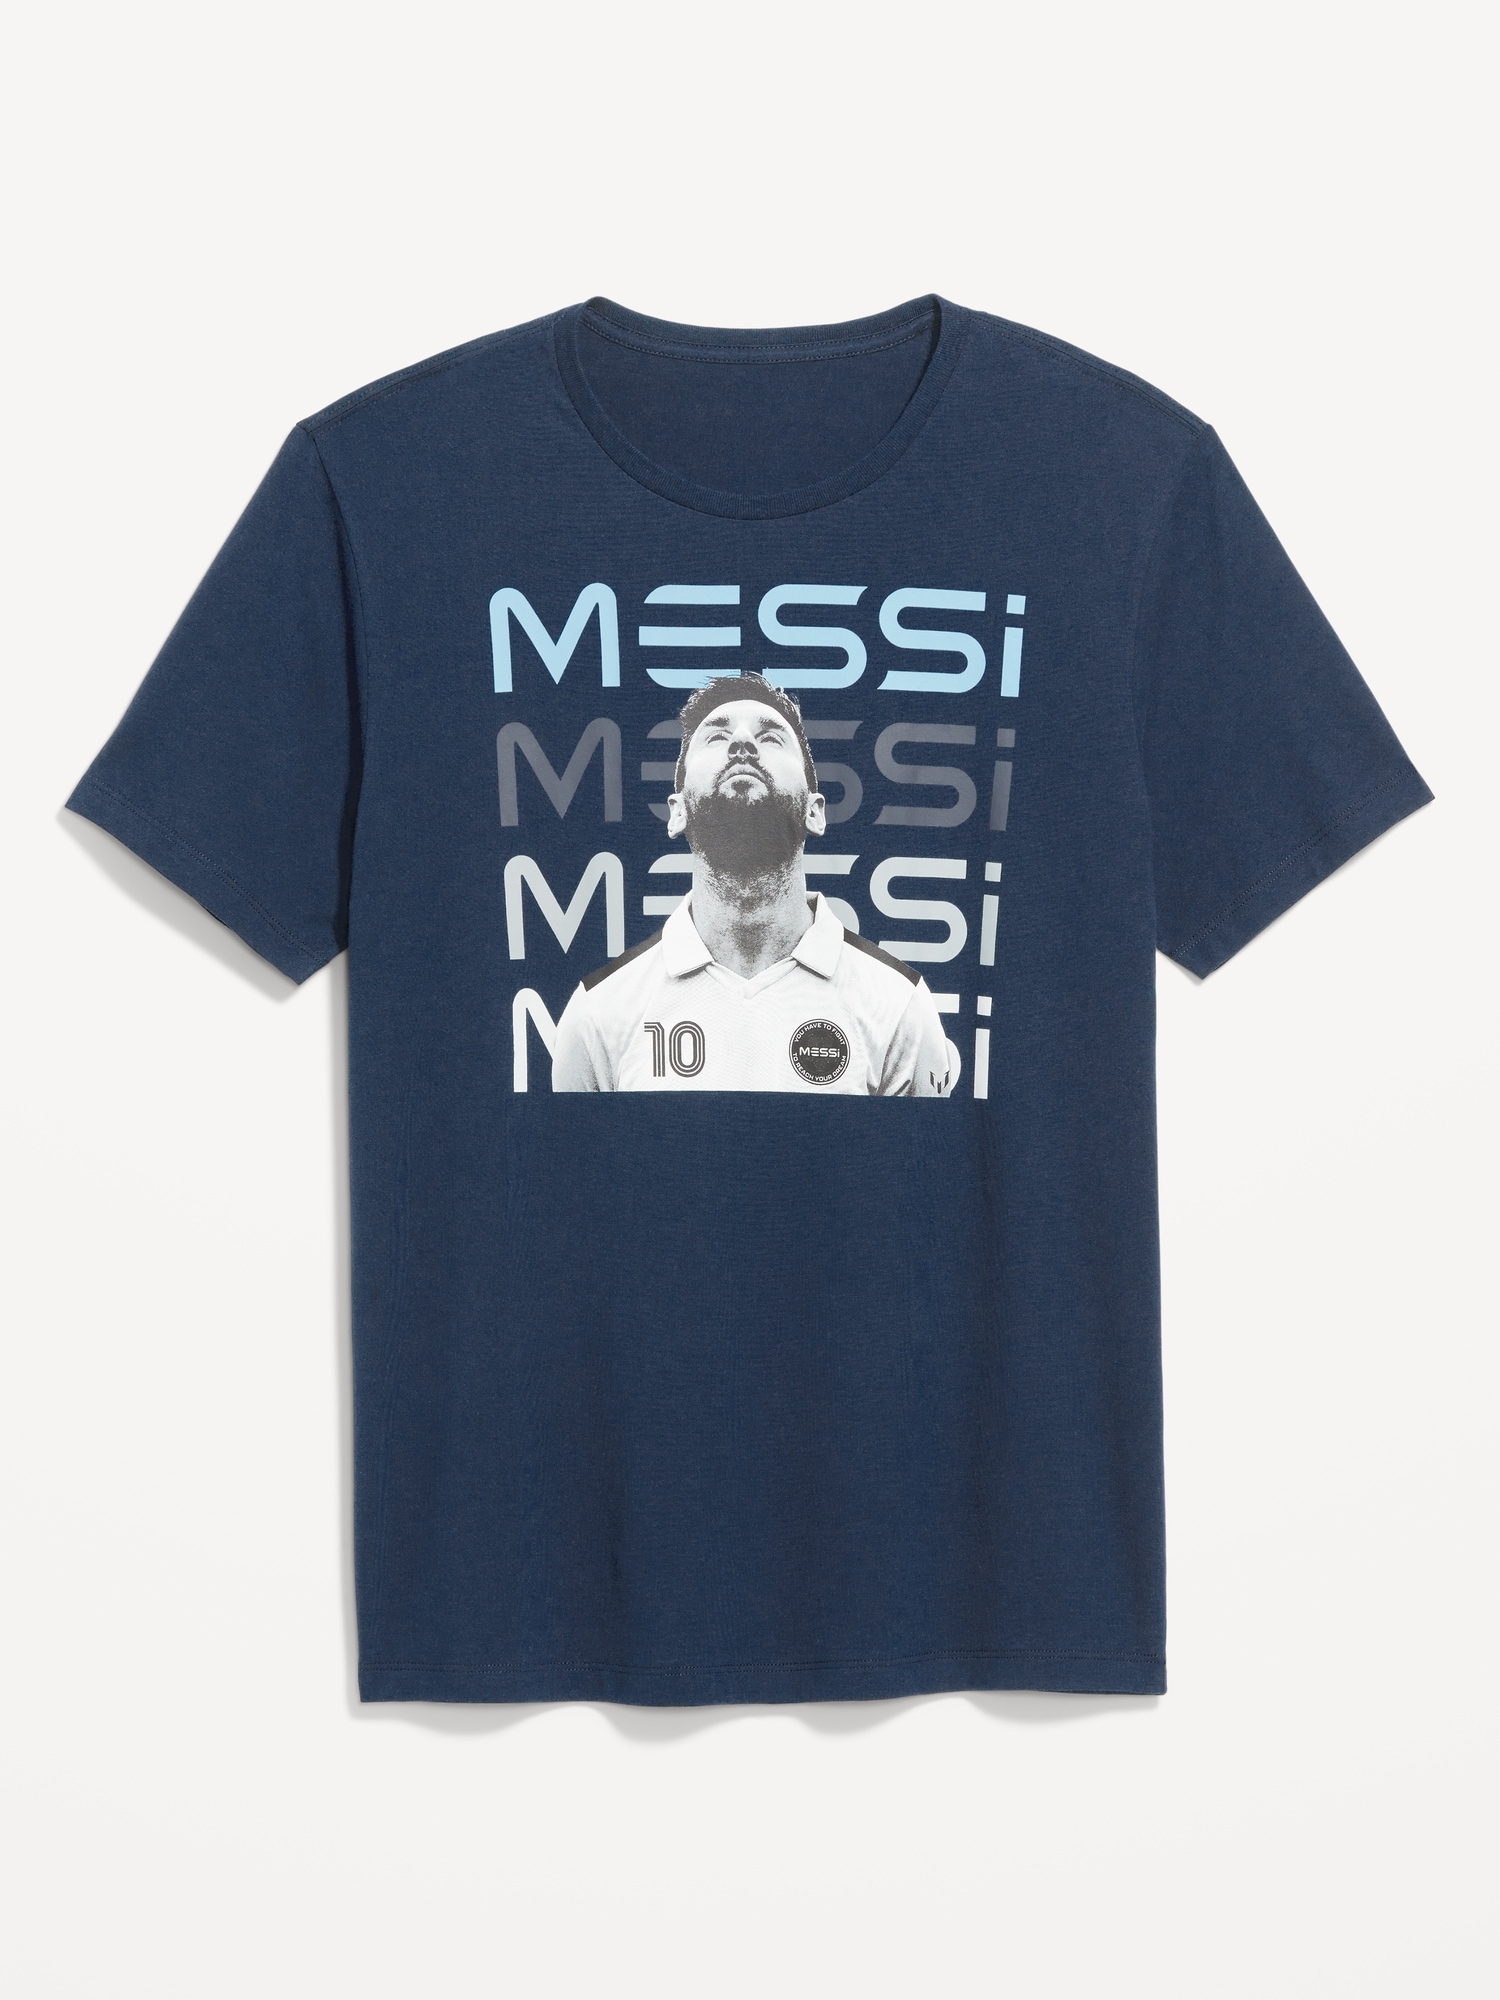 Messi Gender-Neutral T-Shirt for Adults